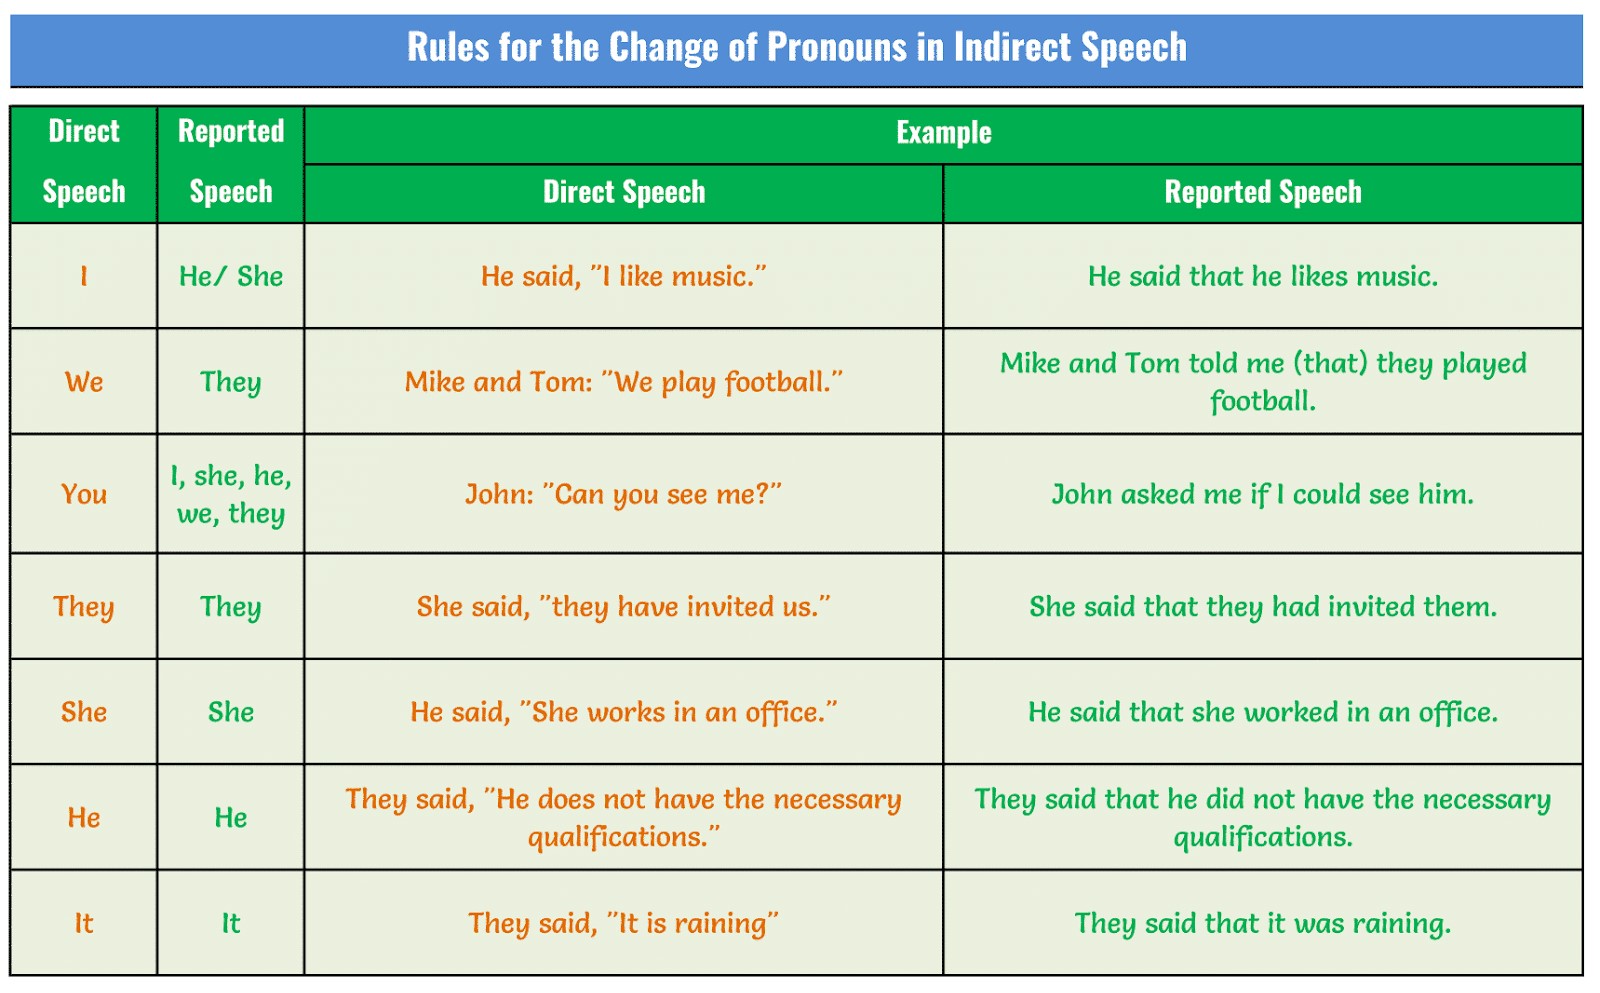 3. Subject pronouns change in reported speech 1